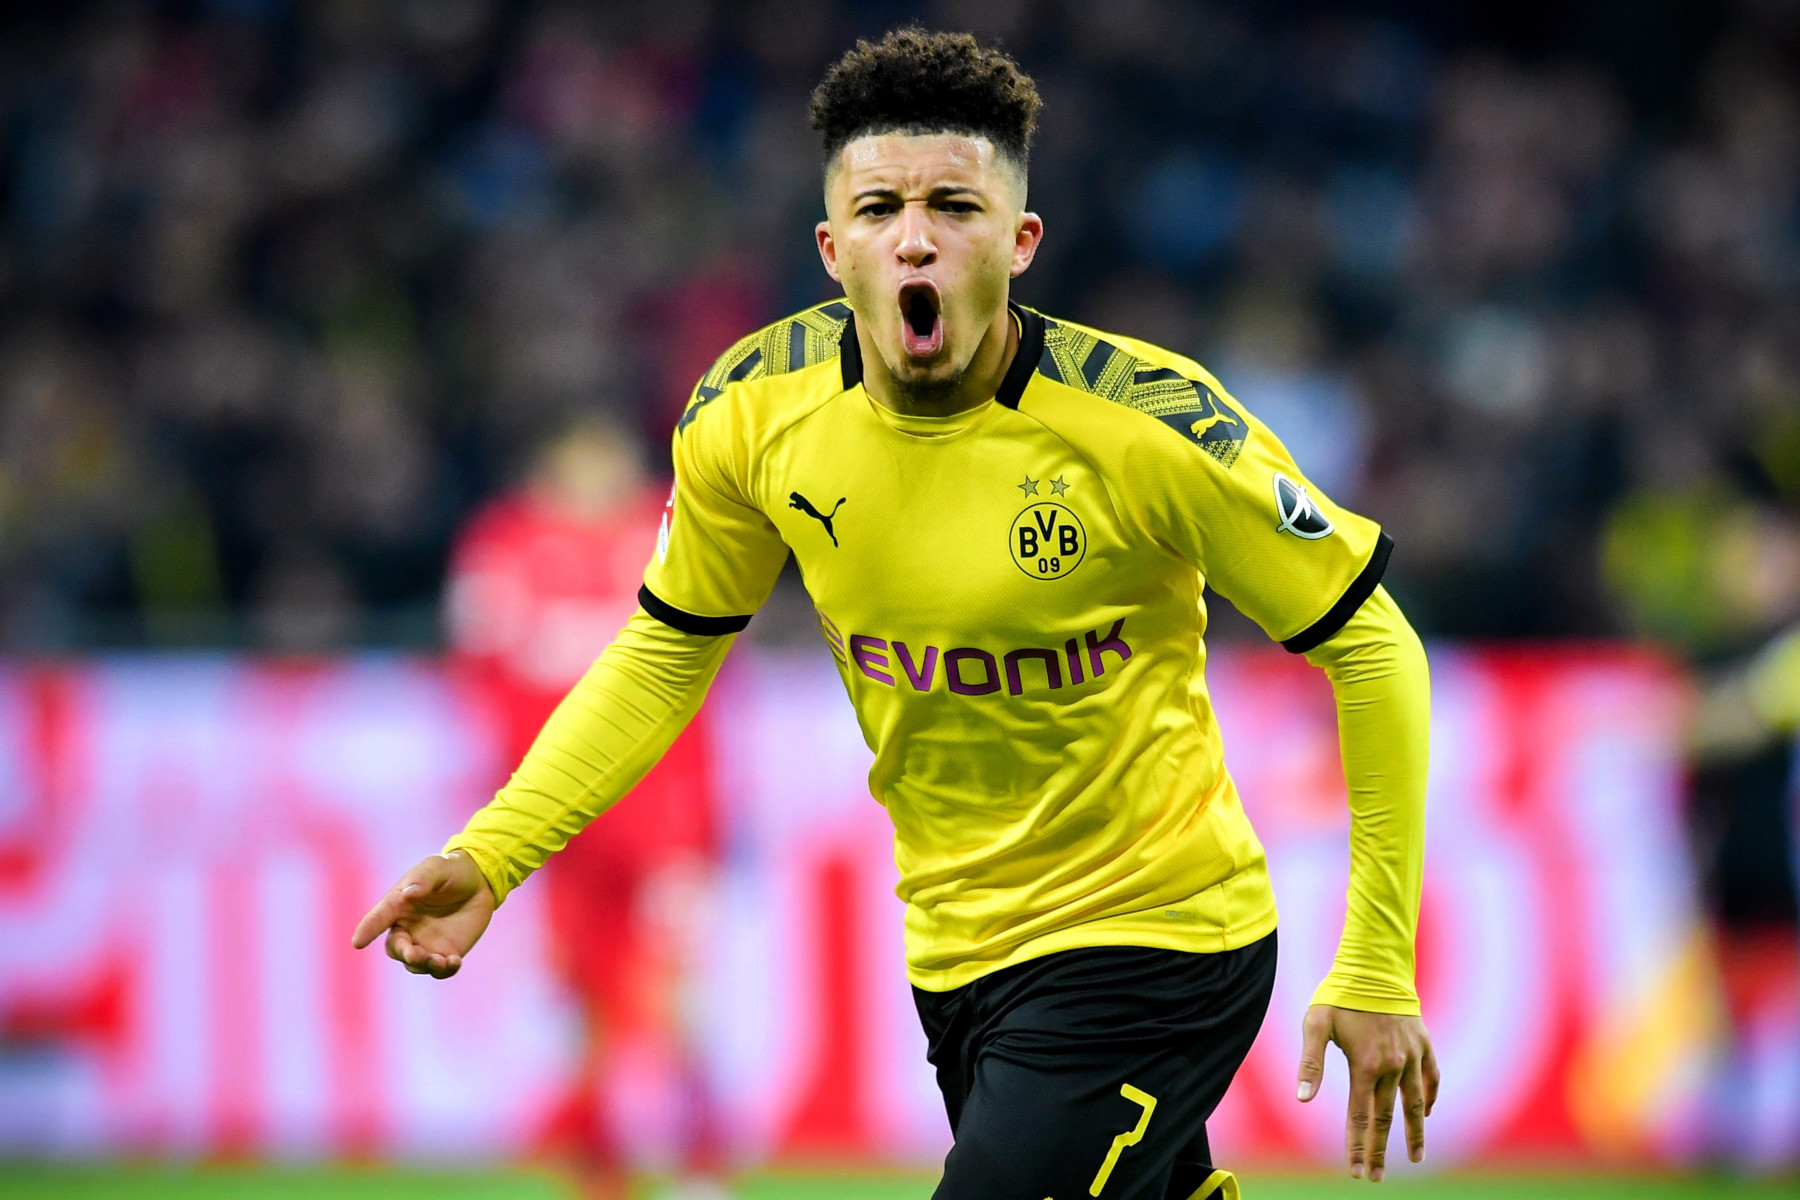 , Jadon Sancho can ‘handle the pressure’ of playing for Man Utd and live up to £120m transfer fee, says Jamie Redknapp